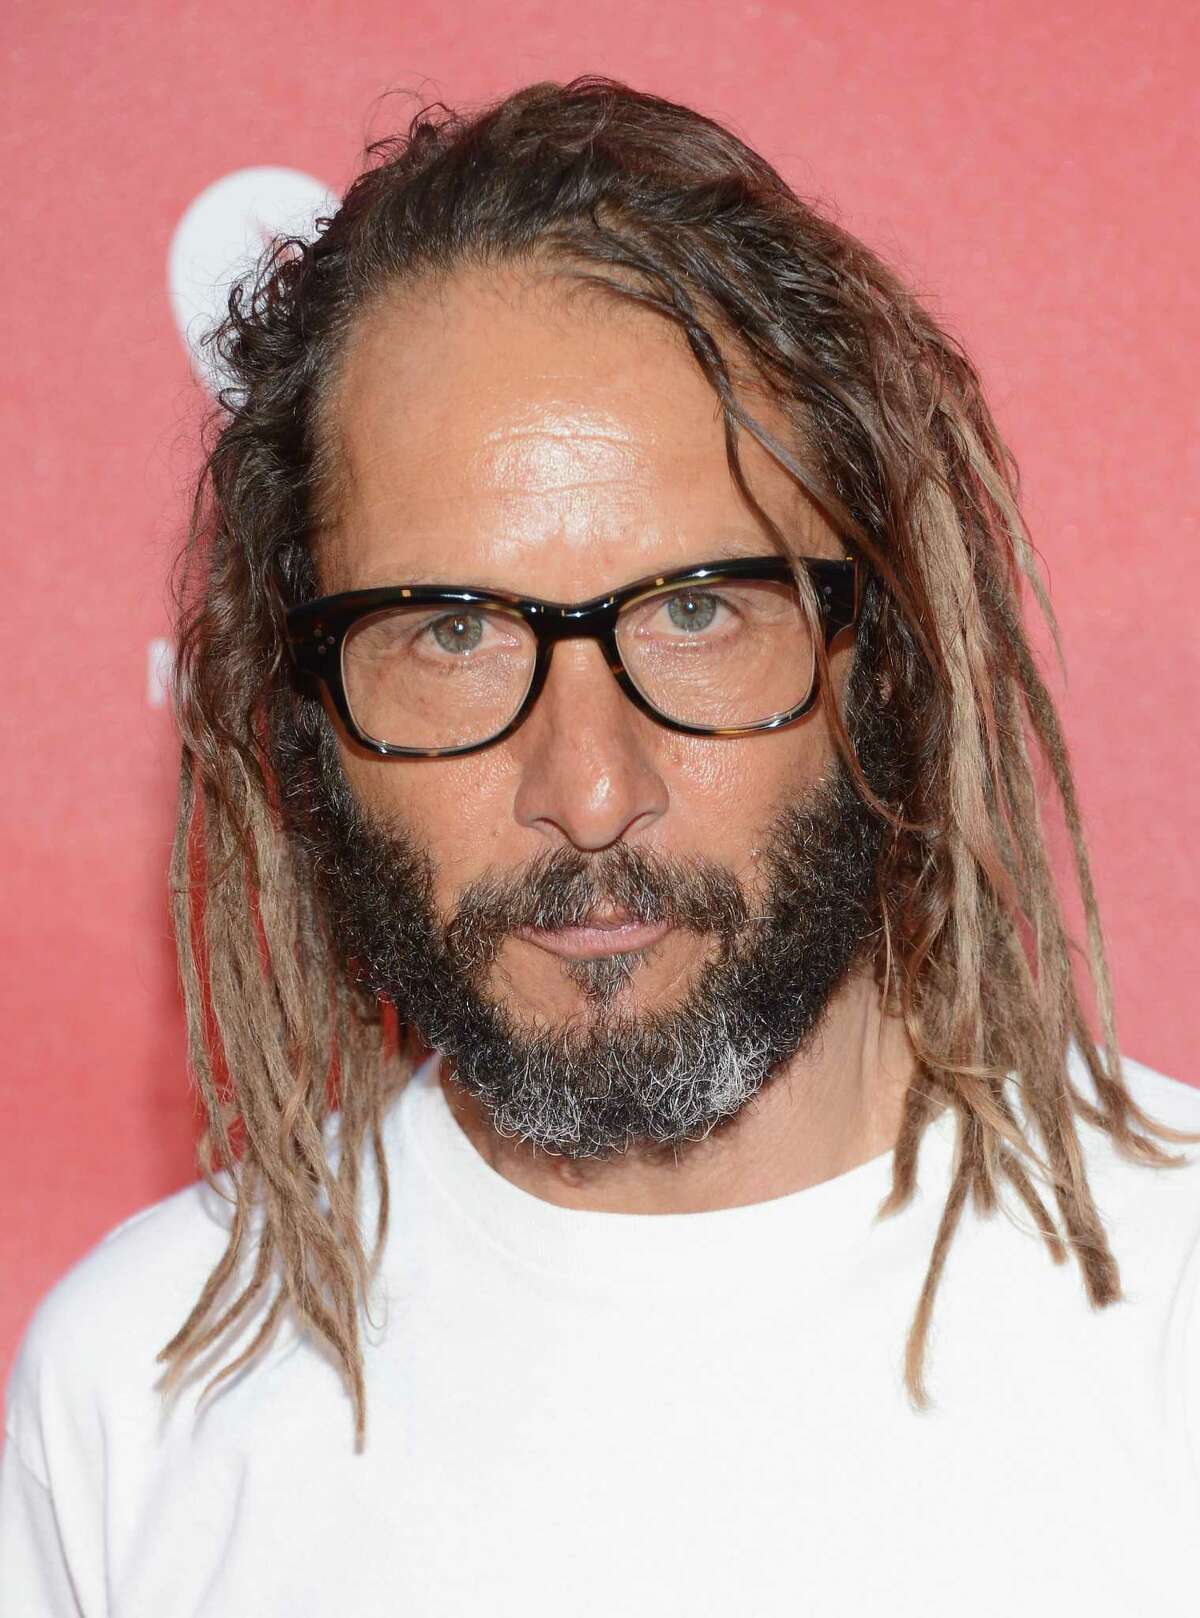 LOS ANGELES, CA - MAY 30: Tony Alva attends the 9th Annual MusiCares MAP Fund Benefit Concert at Club Nokia on May 30, 2013 in Los Angeles, California. (Photo by Jason Kempin/Getty Images)